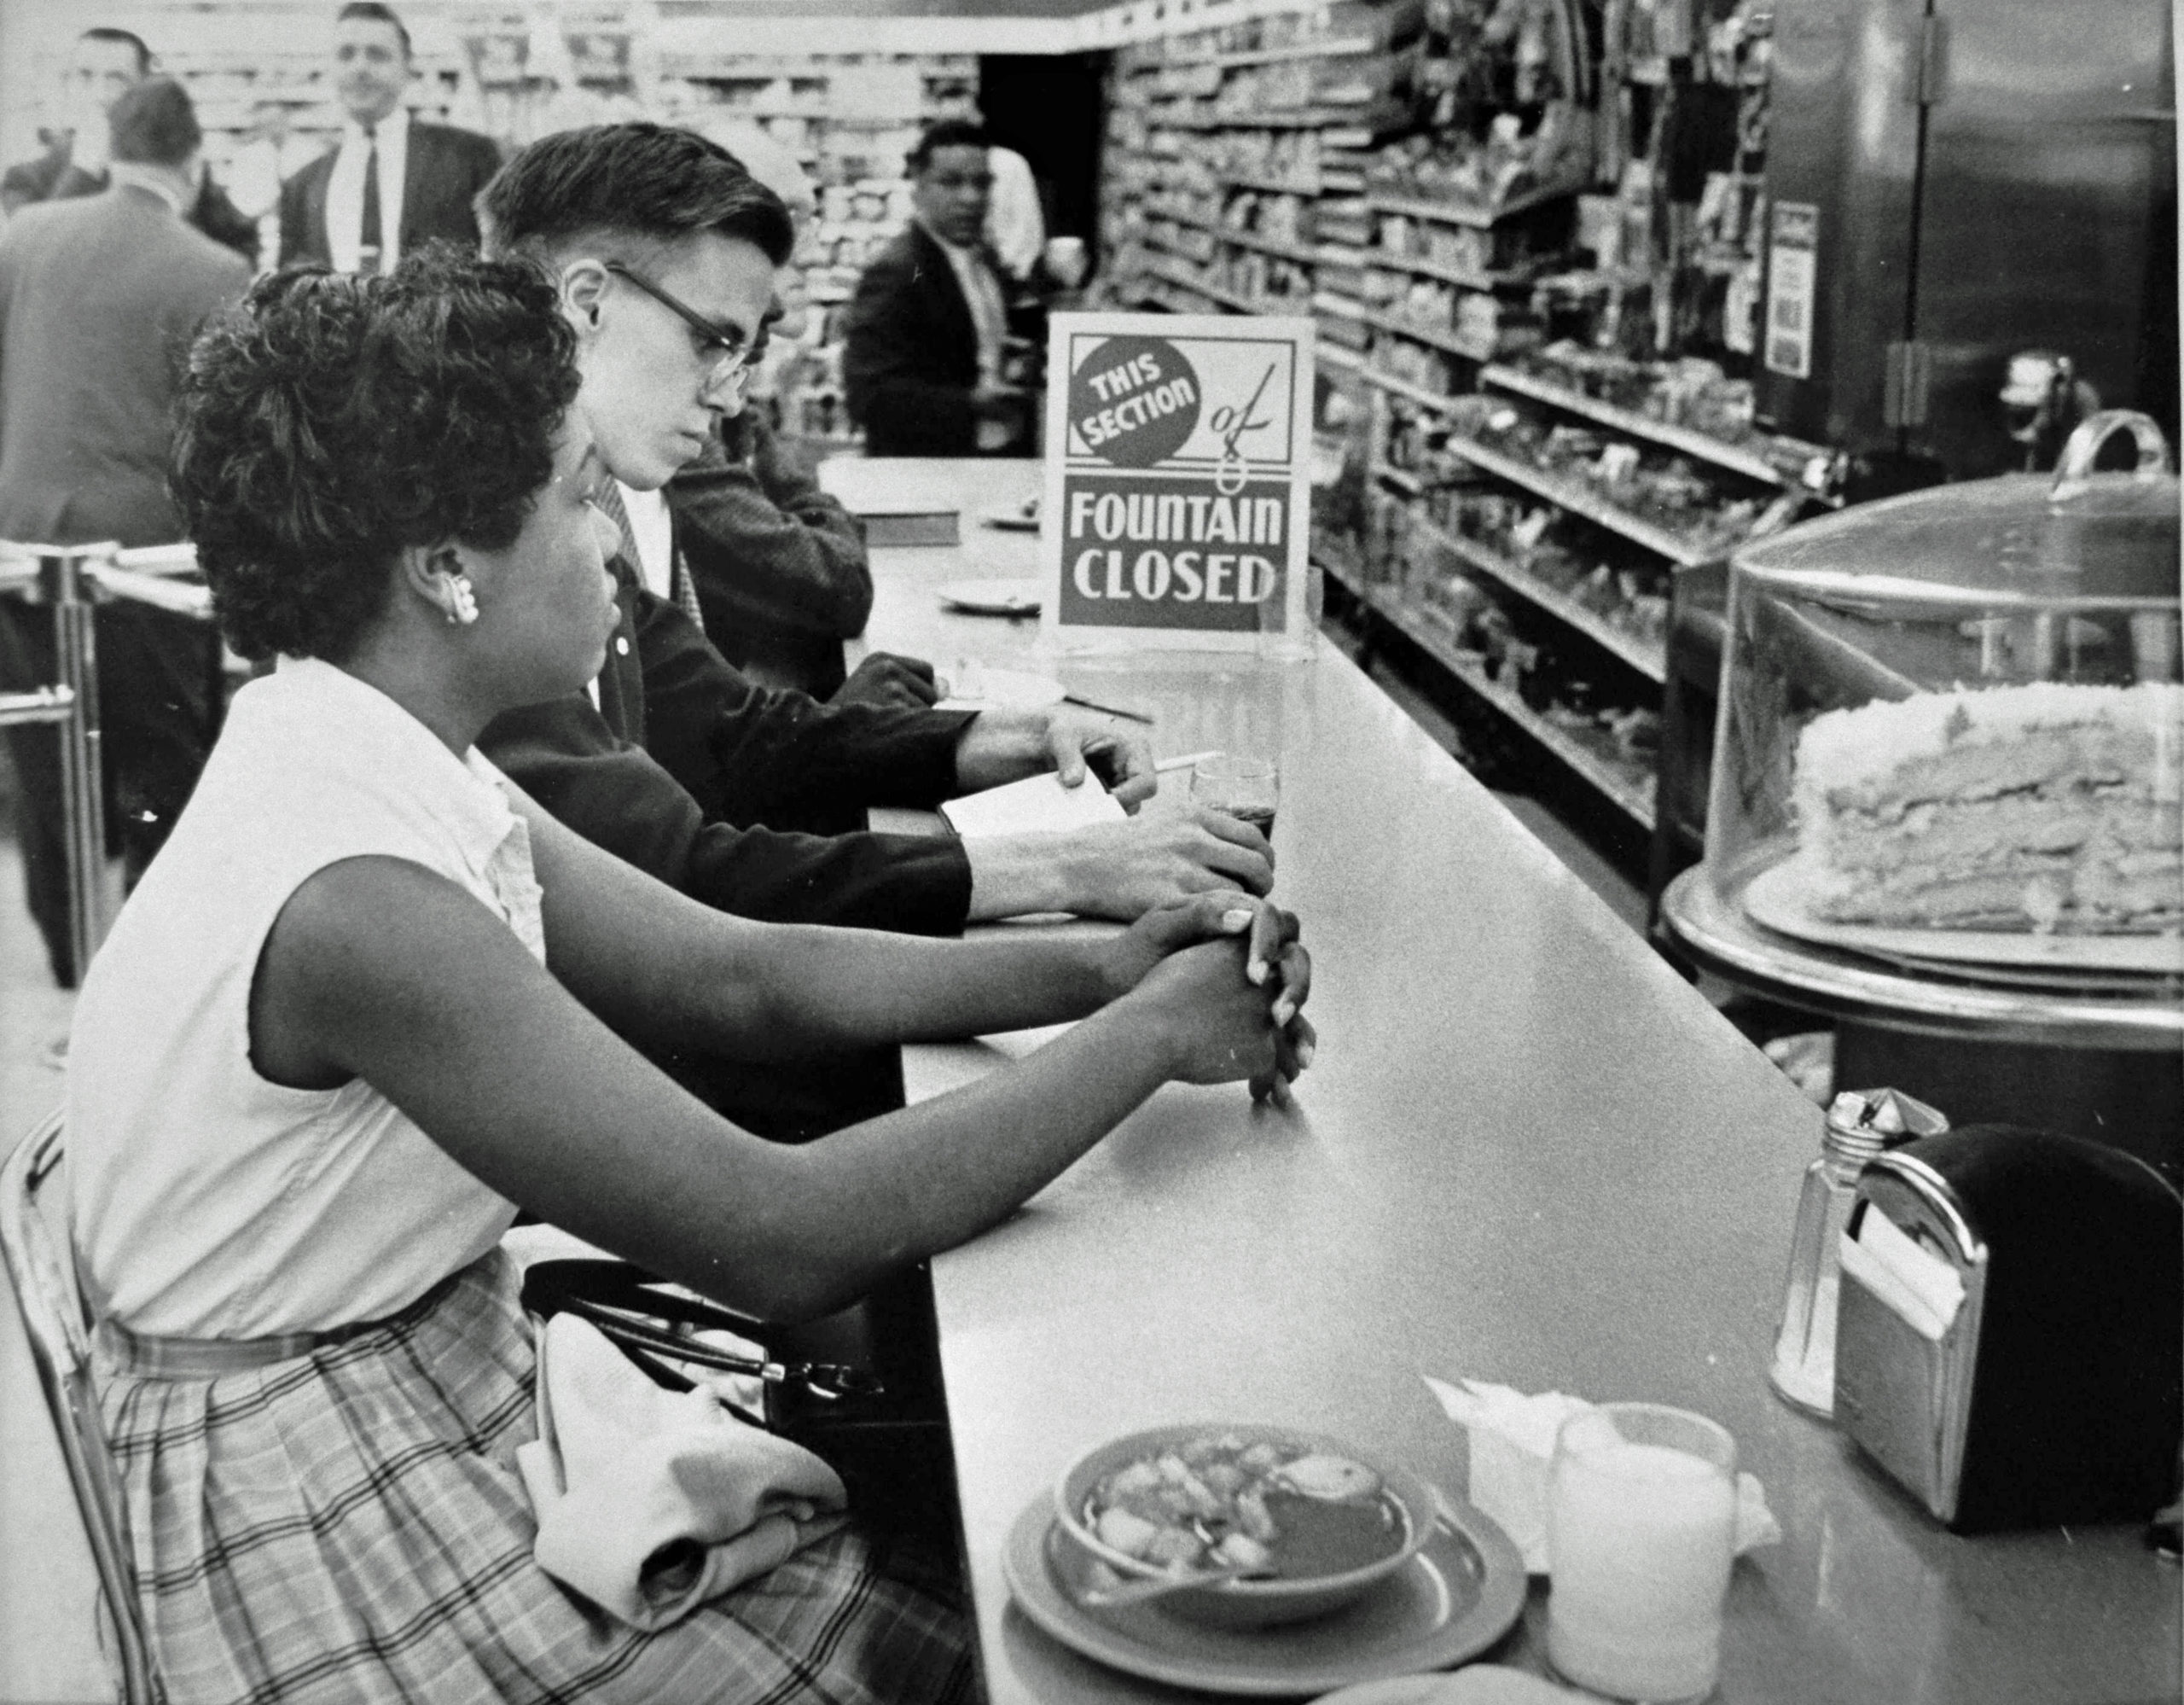 Gwendolyn Greene (later Britt) sits at the People’s Drug Store counter during a sit-in protest in Arlington, June 9, 1960. DC Public Library, Star Collection © Washington Post.